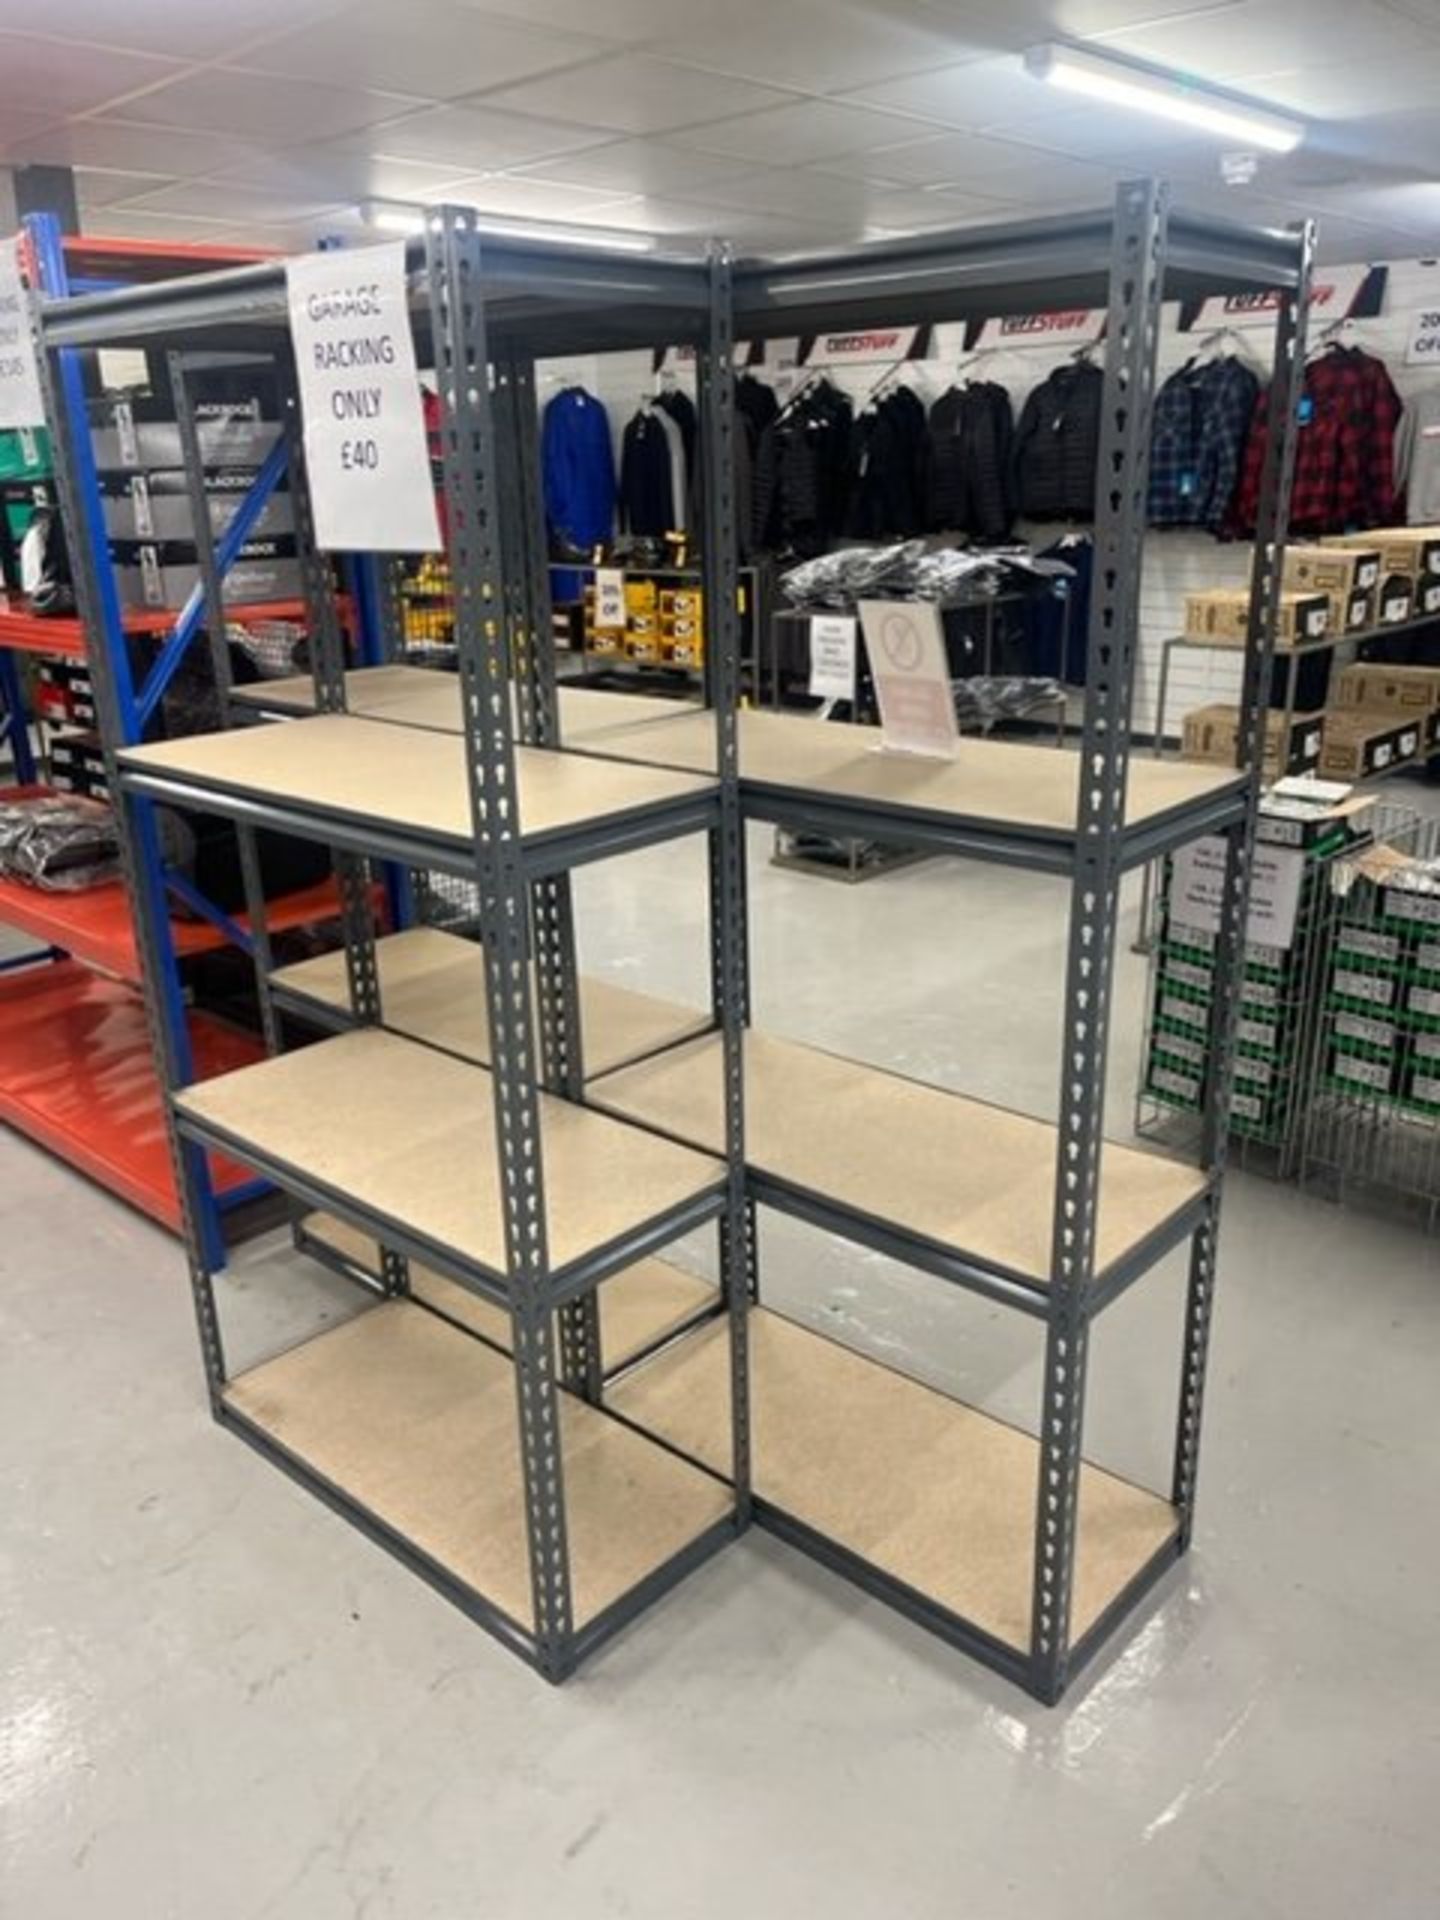 Garage Racking, four levels, five bays, approx. 1820mm high x 900mm long x 400mm wide (vendors